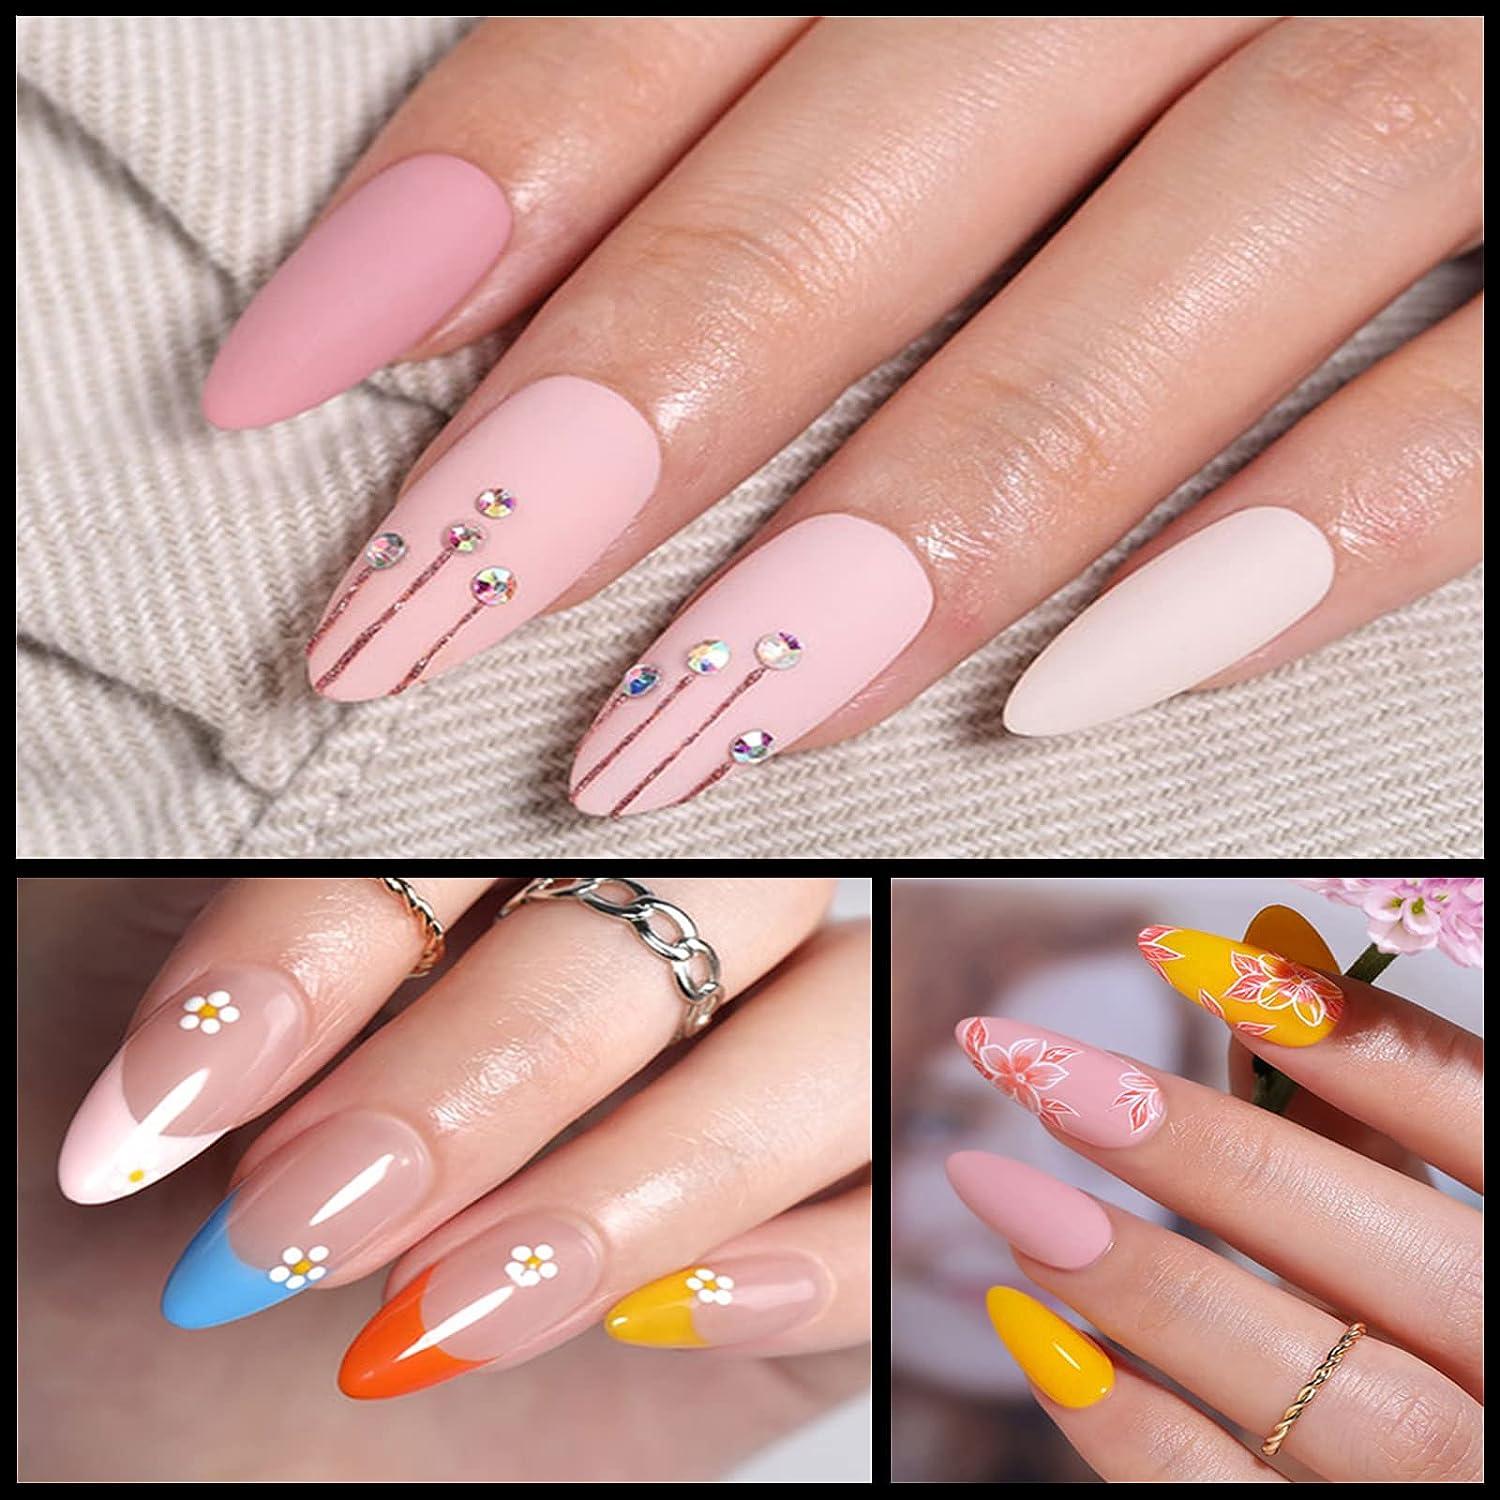 32 Simple Summer Square Acrylic Nails Designs in 2021 | Short gel nails,  White nails, Acrylic nails coffin short